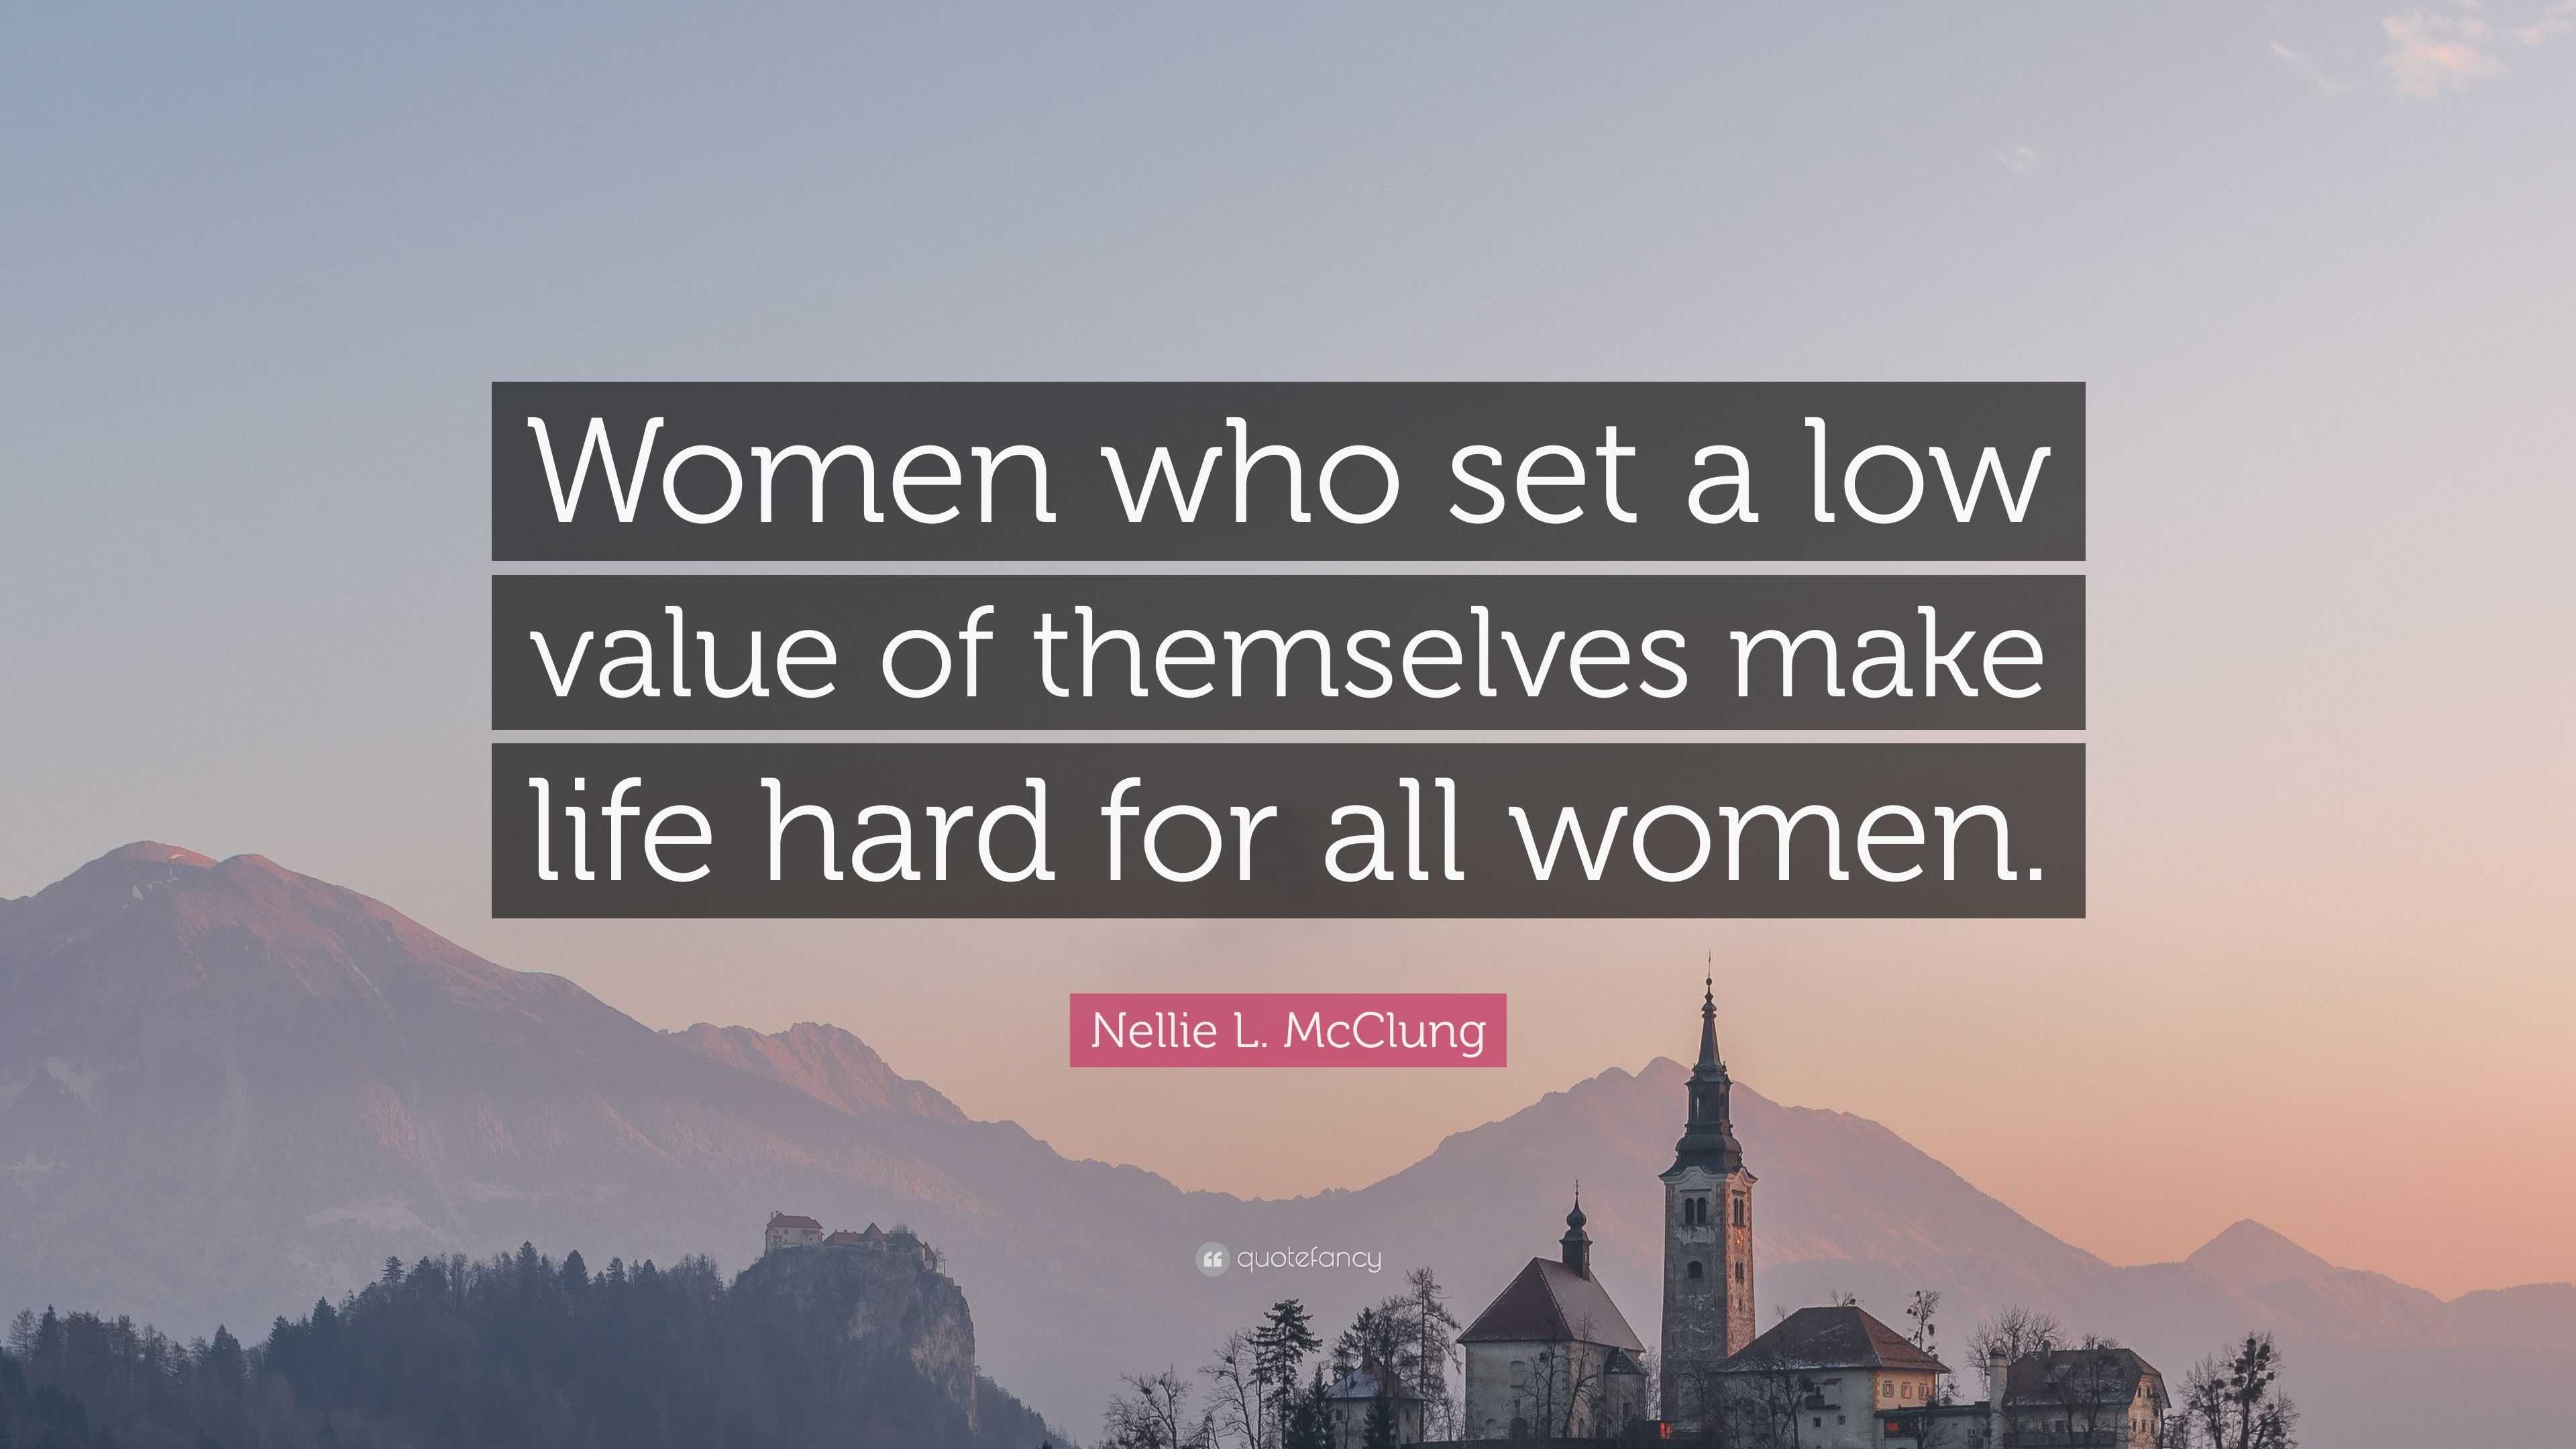 Nellie L. McClung Quote: “Women who set a low value of themselves make life  hard for